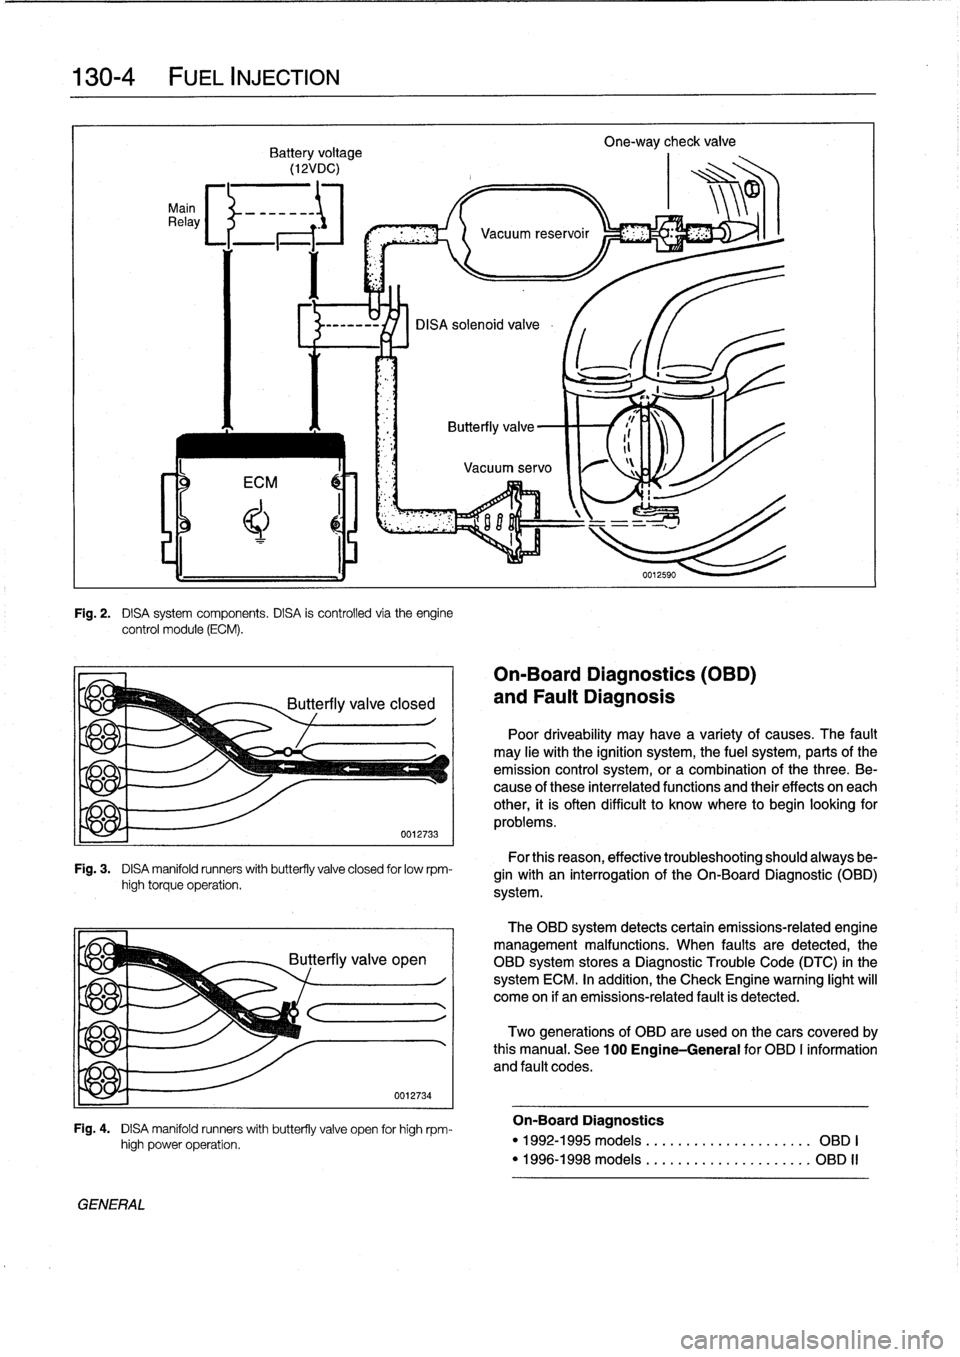 BMW 323i 1995 E36 Service Manual 
130-
4

	

FUEL
INJECTION

Main
Relay

Fig
.
2
.

	

DISA
system
components
.
DISA
is
controlled
via
theengine
control
module
(ECM)
.

Fig
.
3
.

	

DISA
manifold
runners
with
butterfly
valve
closed
